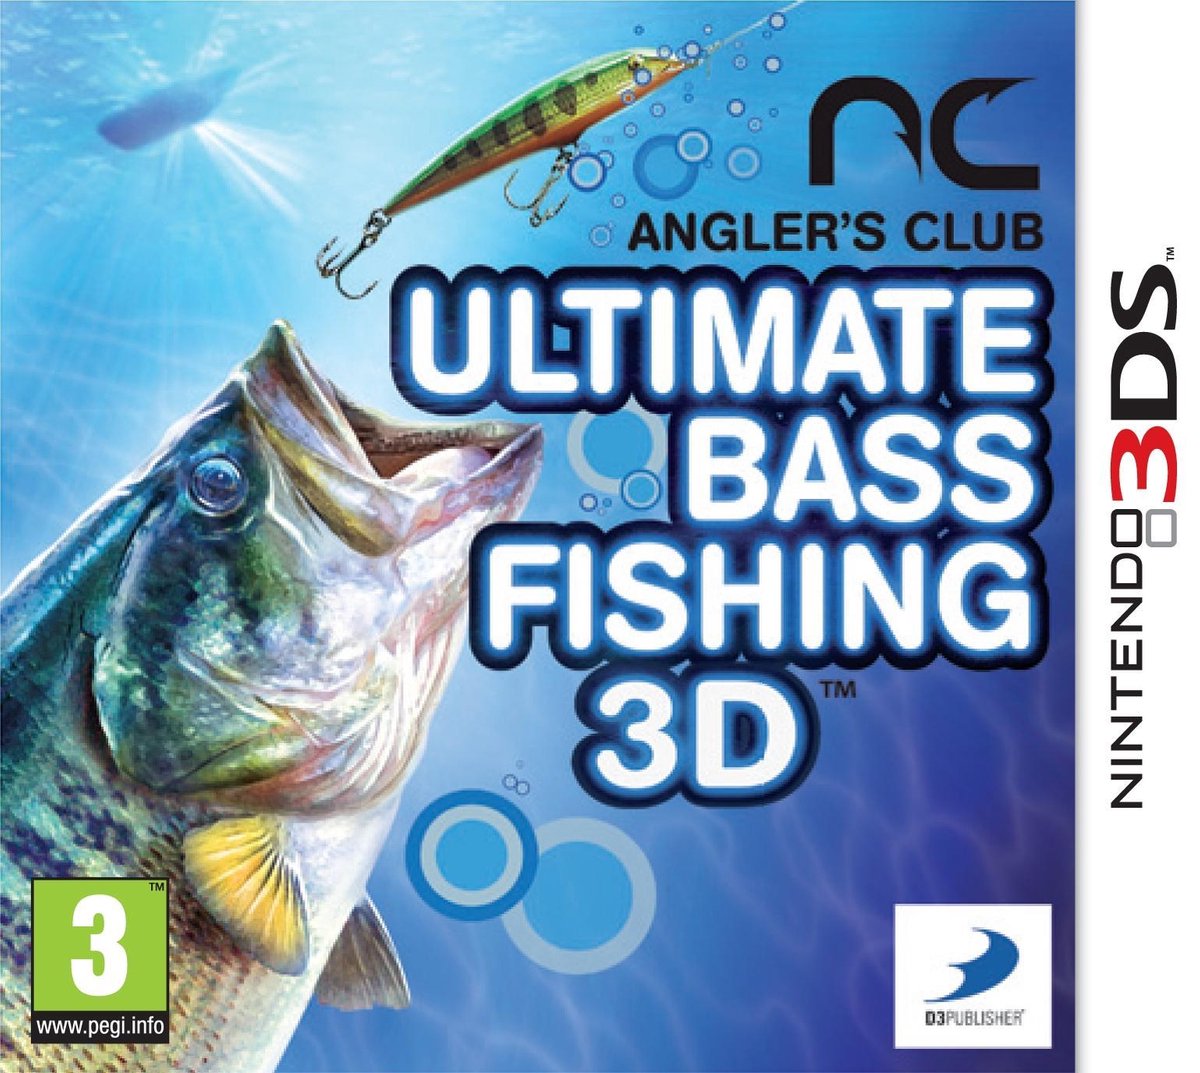 D3Publisher Angler's Club Ultimate Bass Fishing 3D